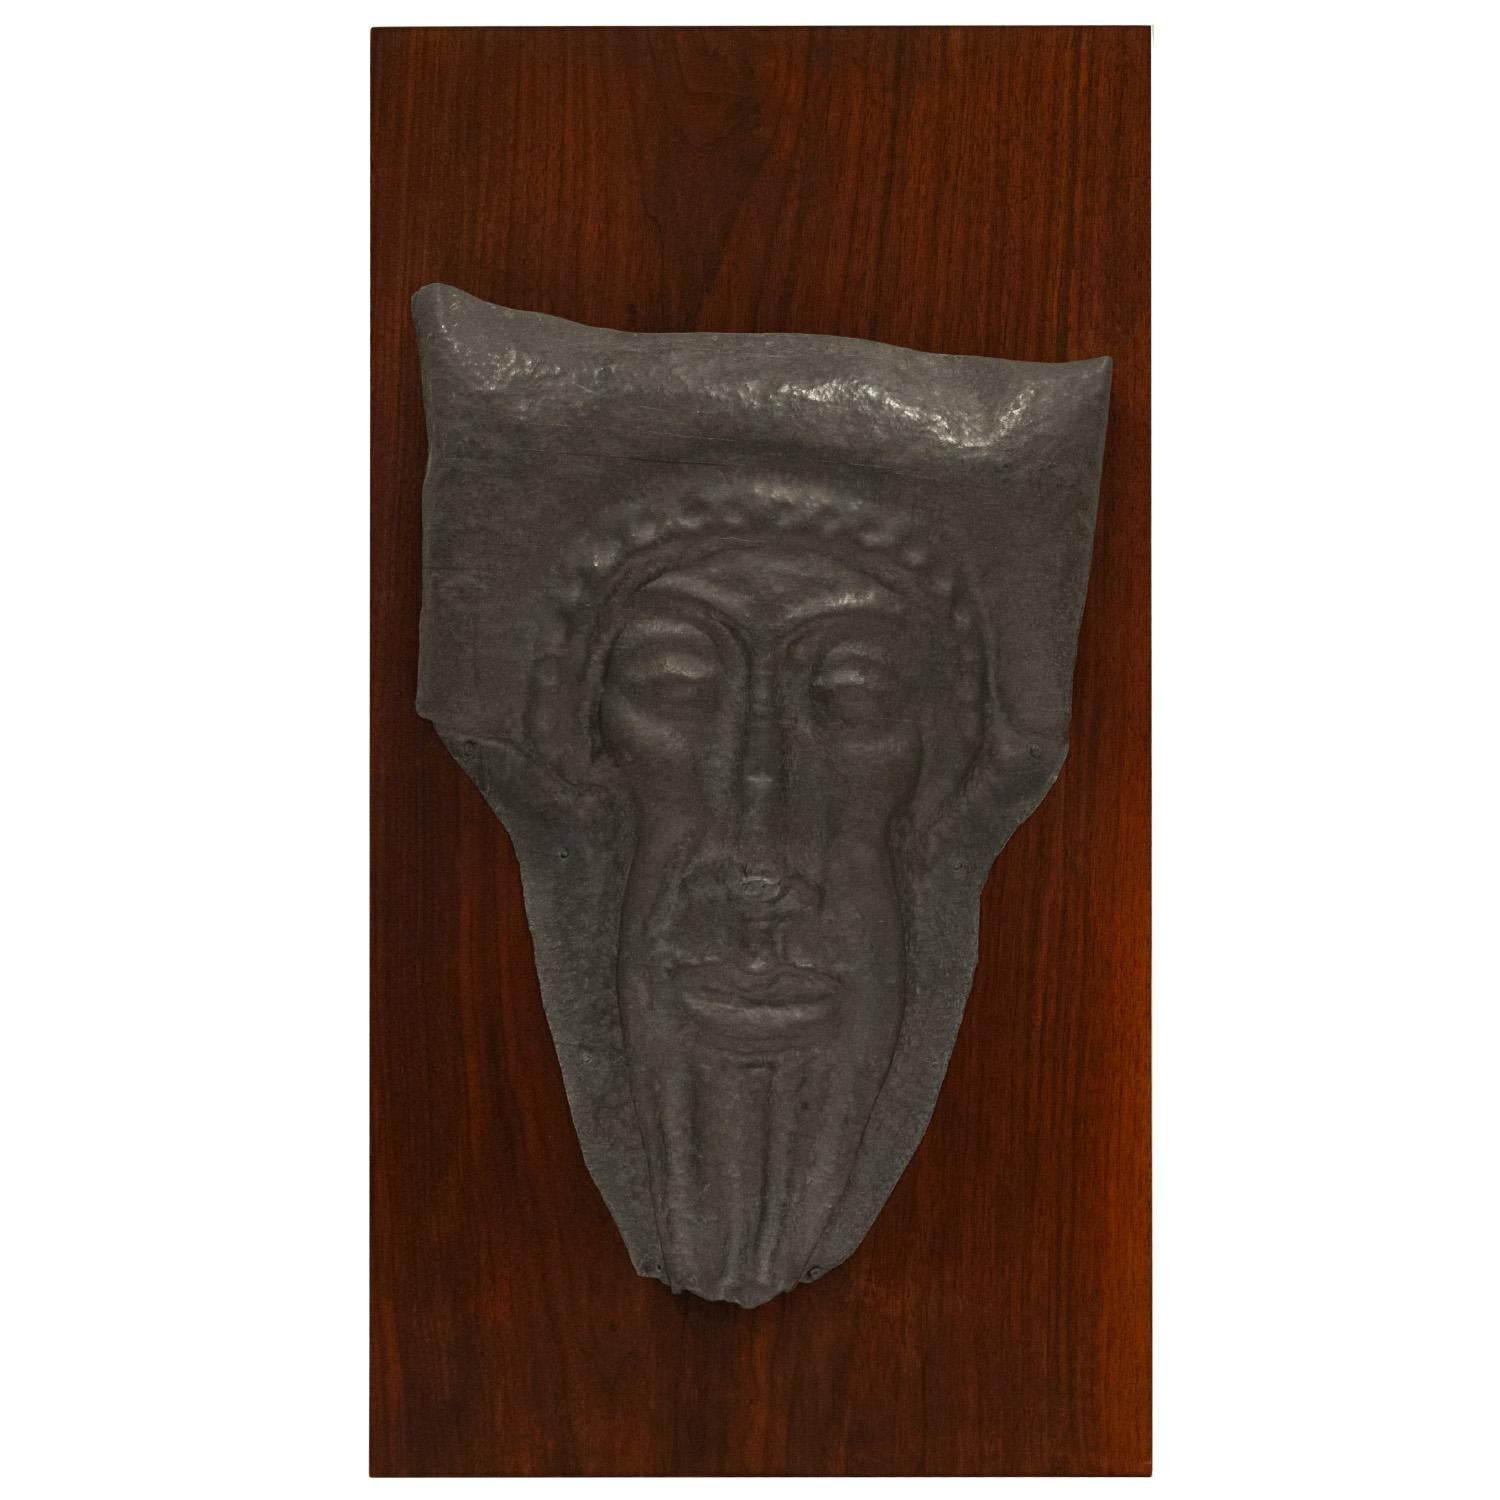 Artisan made face of an ancient Greek man with a laurel wreath molded in pewter and set on a walnut backing, American 1950's. This captivating work is beautifully made.